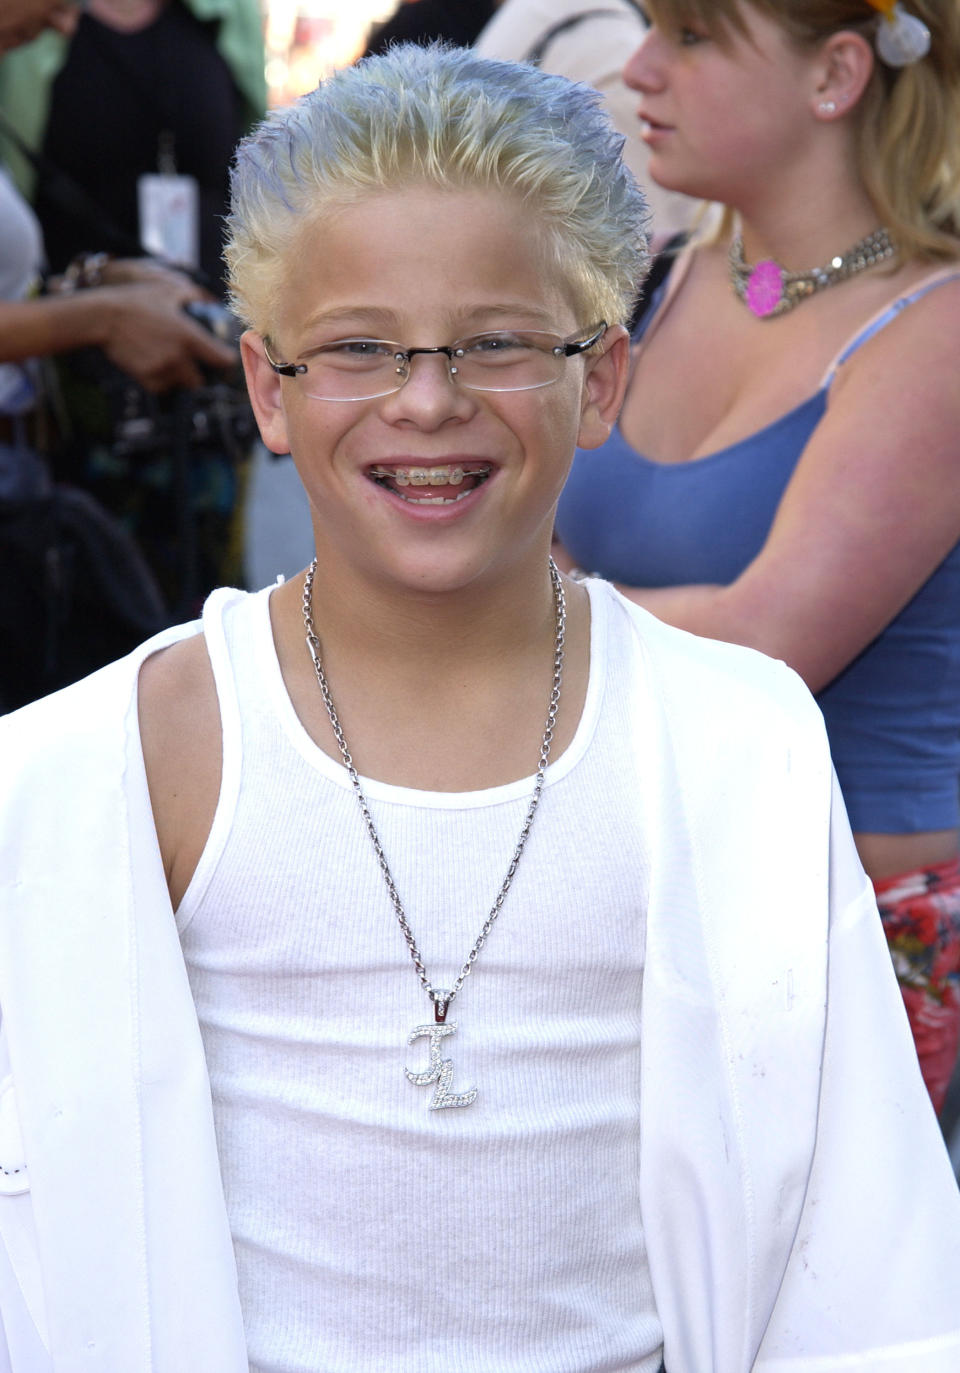 Jonathan Lipnicki during The World Premiere of "Pirates of The Caribbean: The Curse of The Black Pearl" at Disneyland in Anaheim, California, United States. (Photo by SGranitz/WireImage)